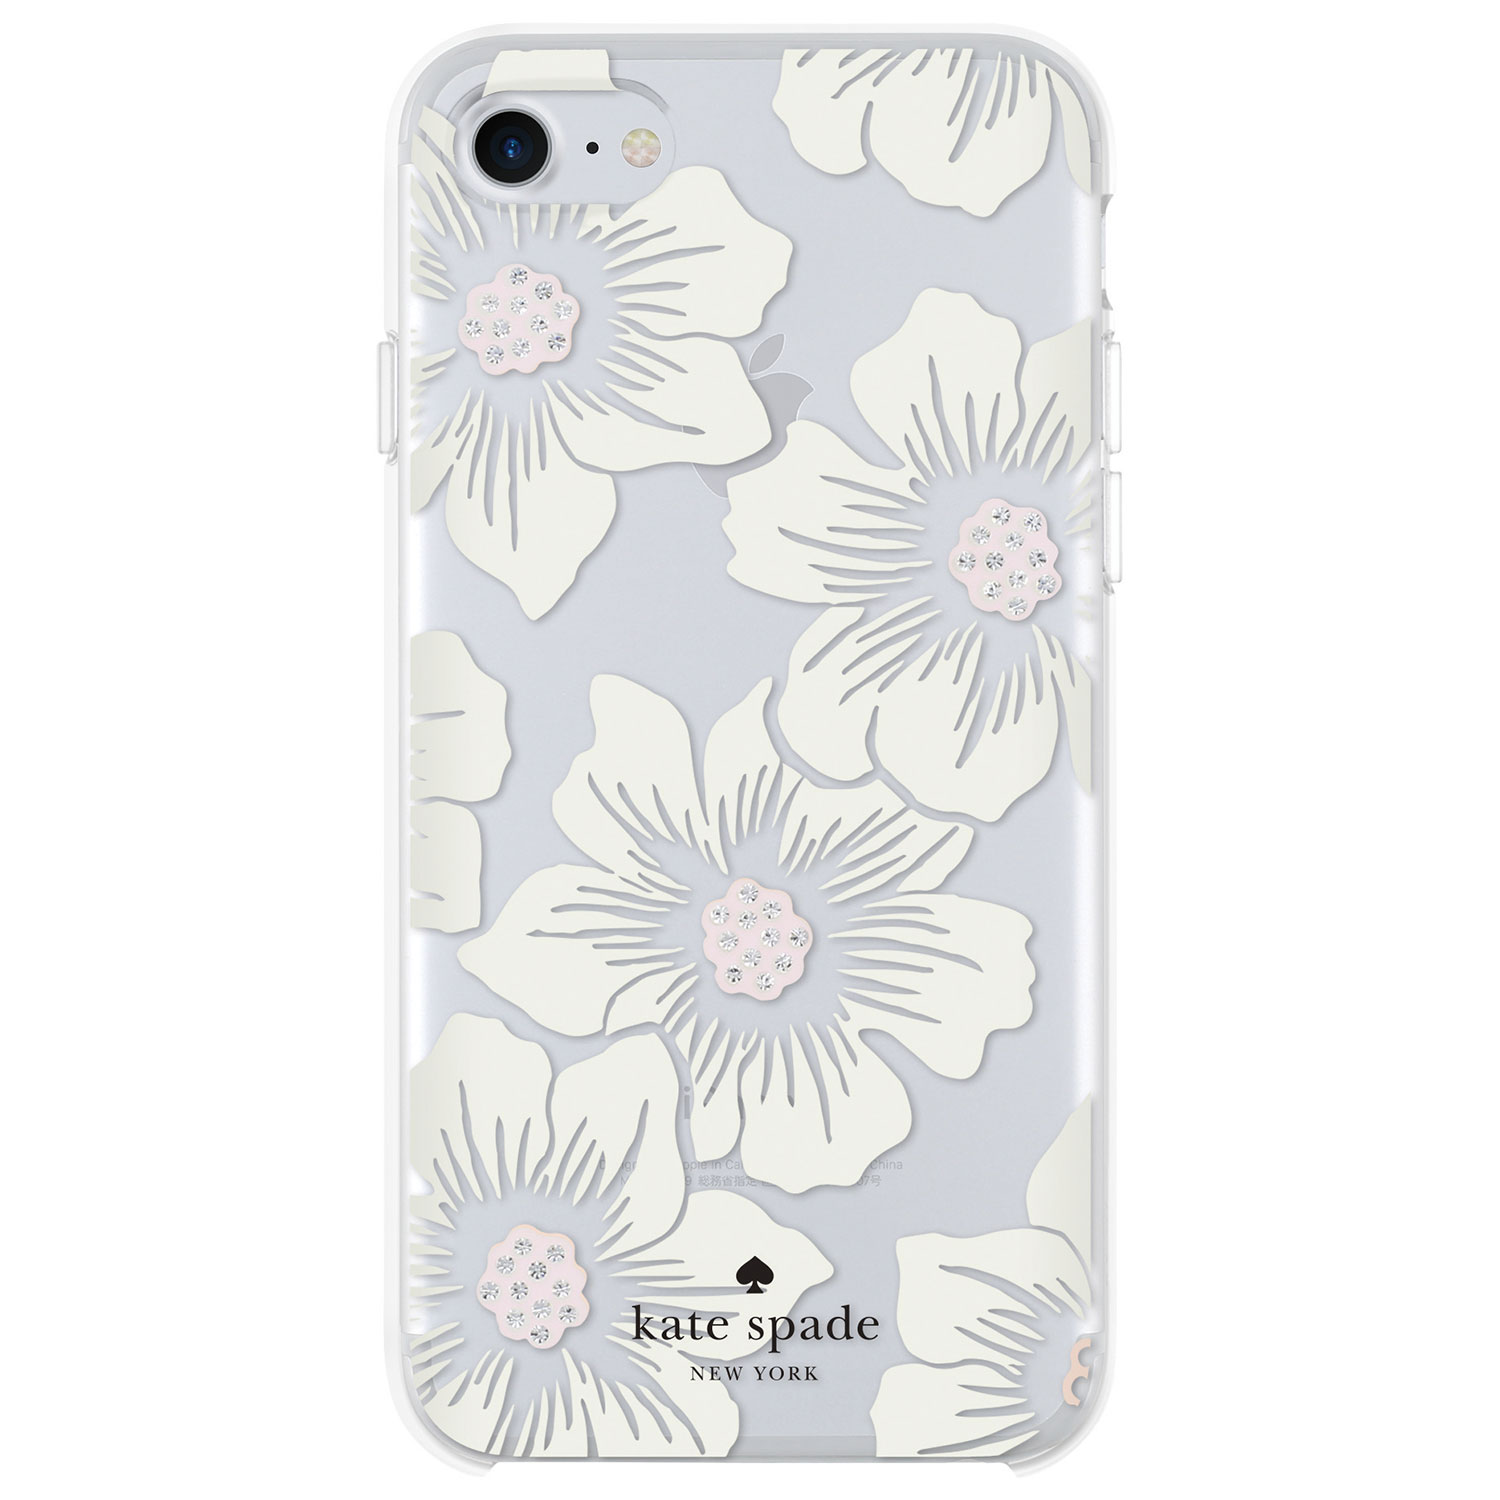 kate spade new york Fitted Hard Shell Case for iPhone SE (3rd/2nd Gen)/8/7 - Hollyhock Floral